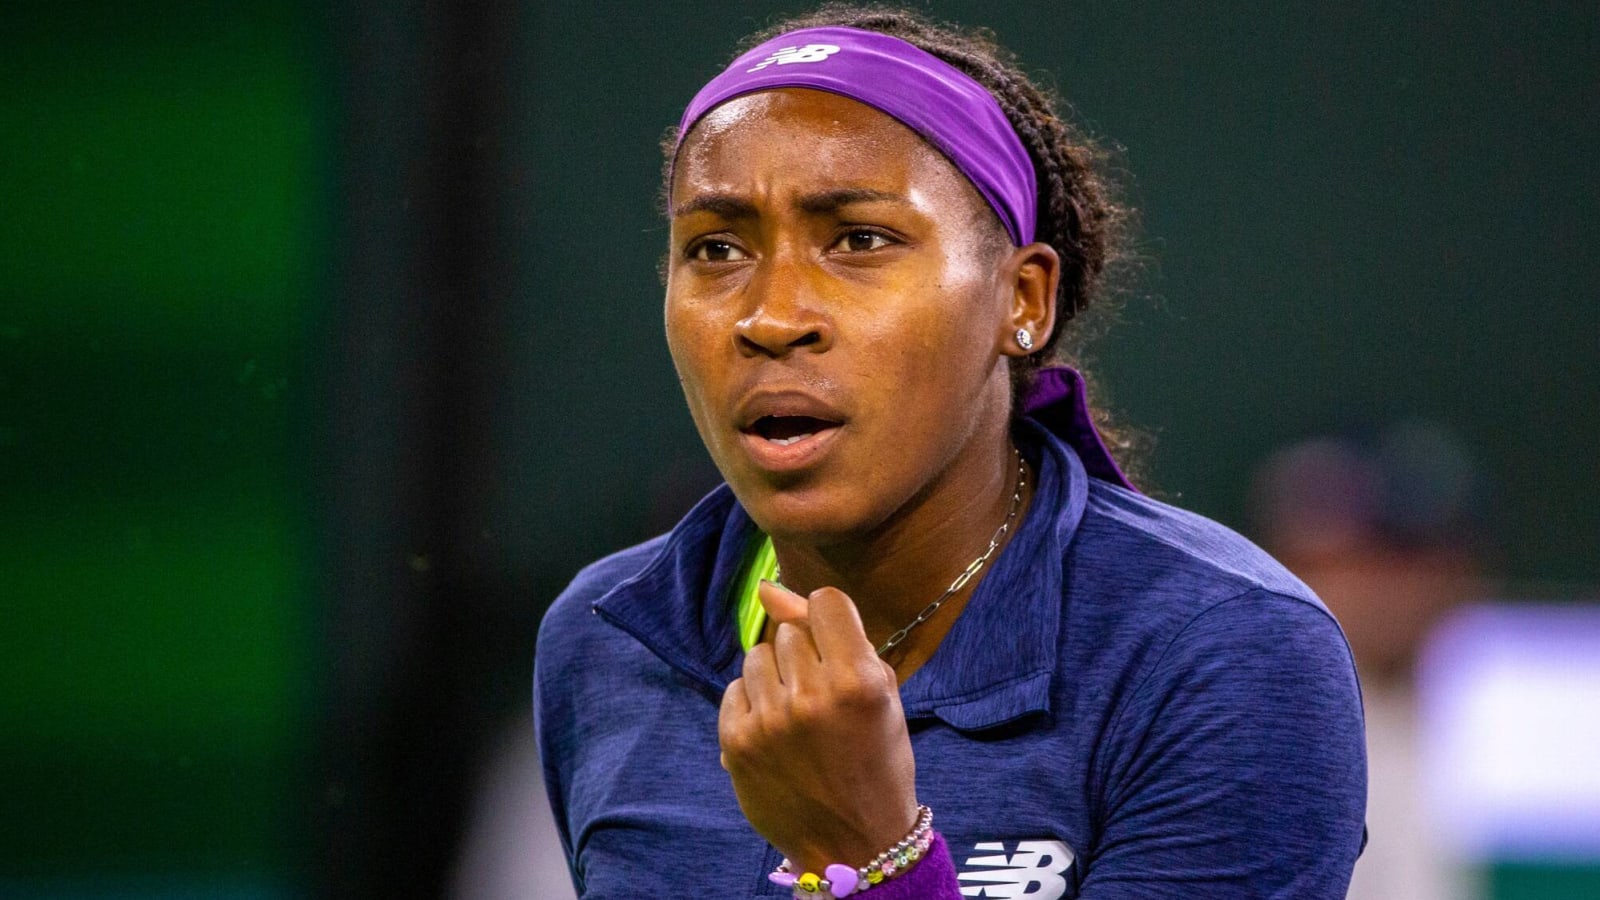 'The kid knows how to fight,' Coco Gauff’s 'unreal' grit catches Rennae Stubbs’ eye as the American saves 3 incredible match points